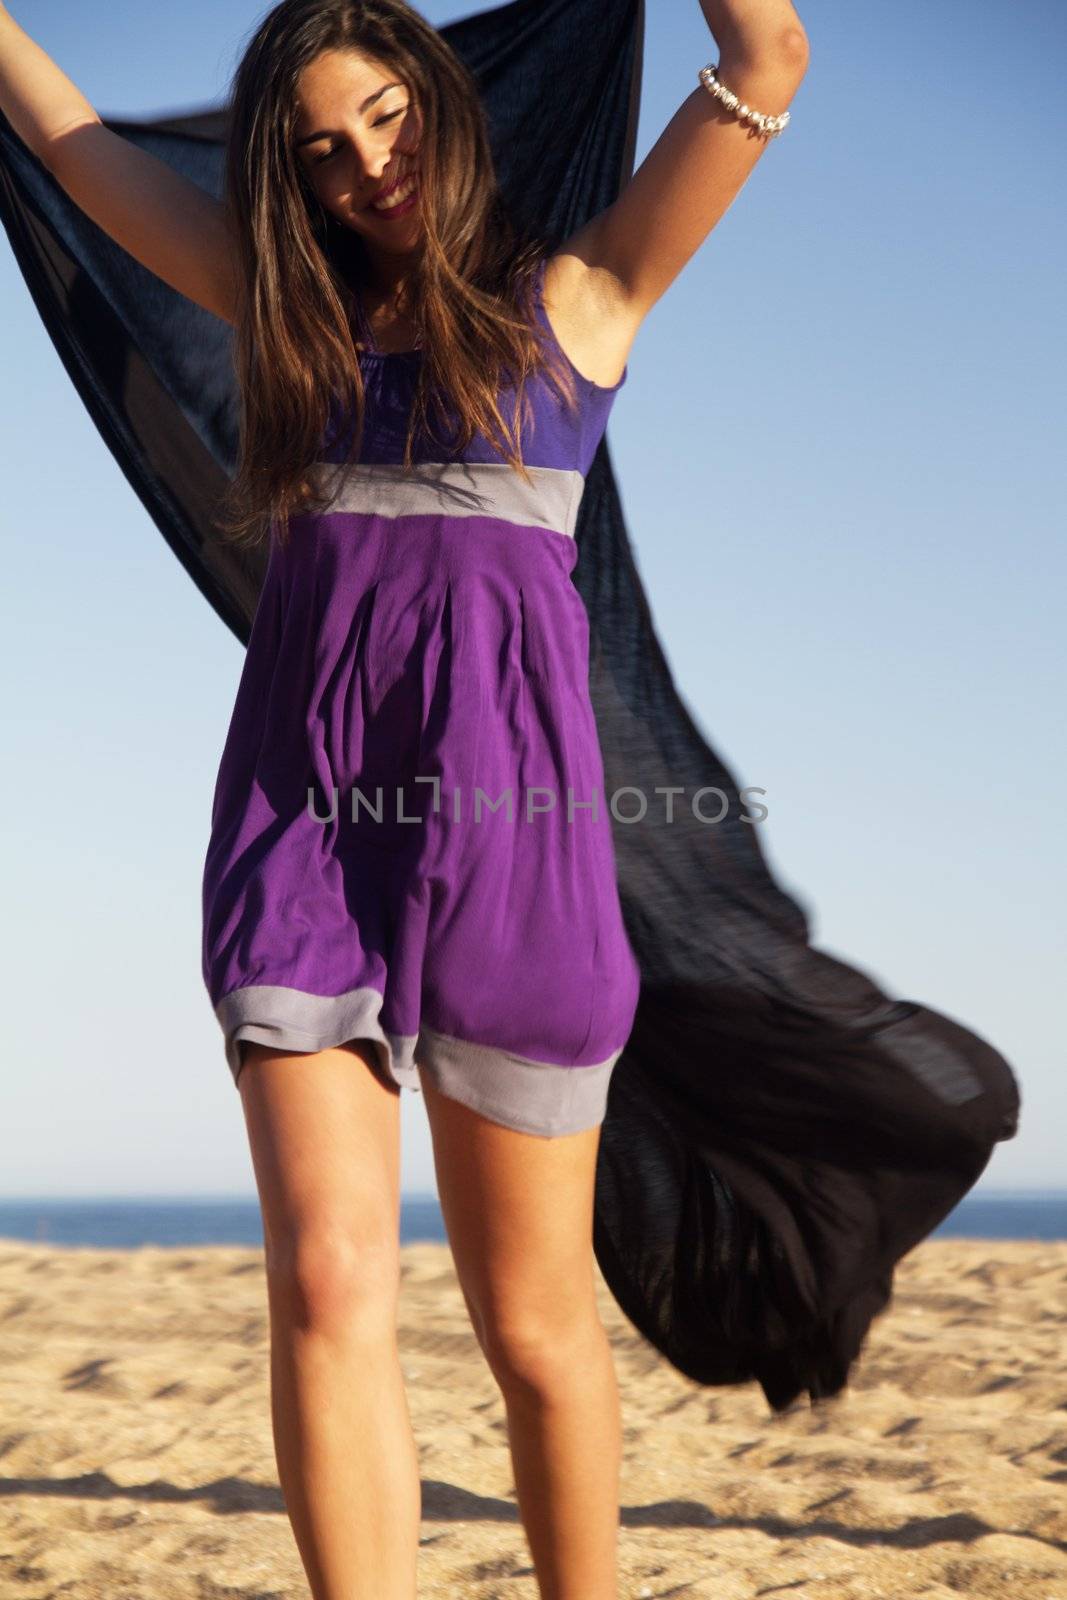 View of a beautiful young girl playful with a purple dress in the beach.